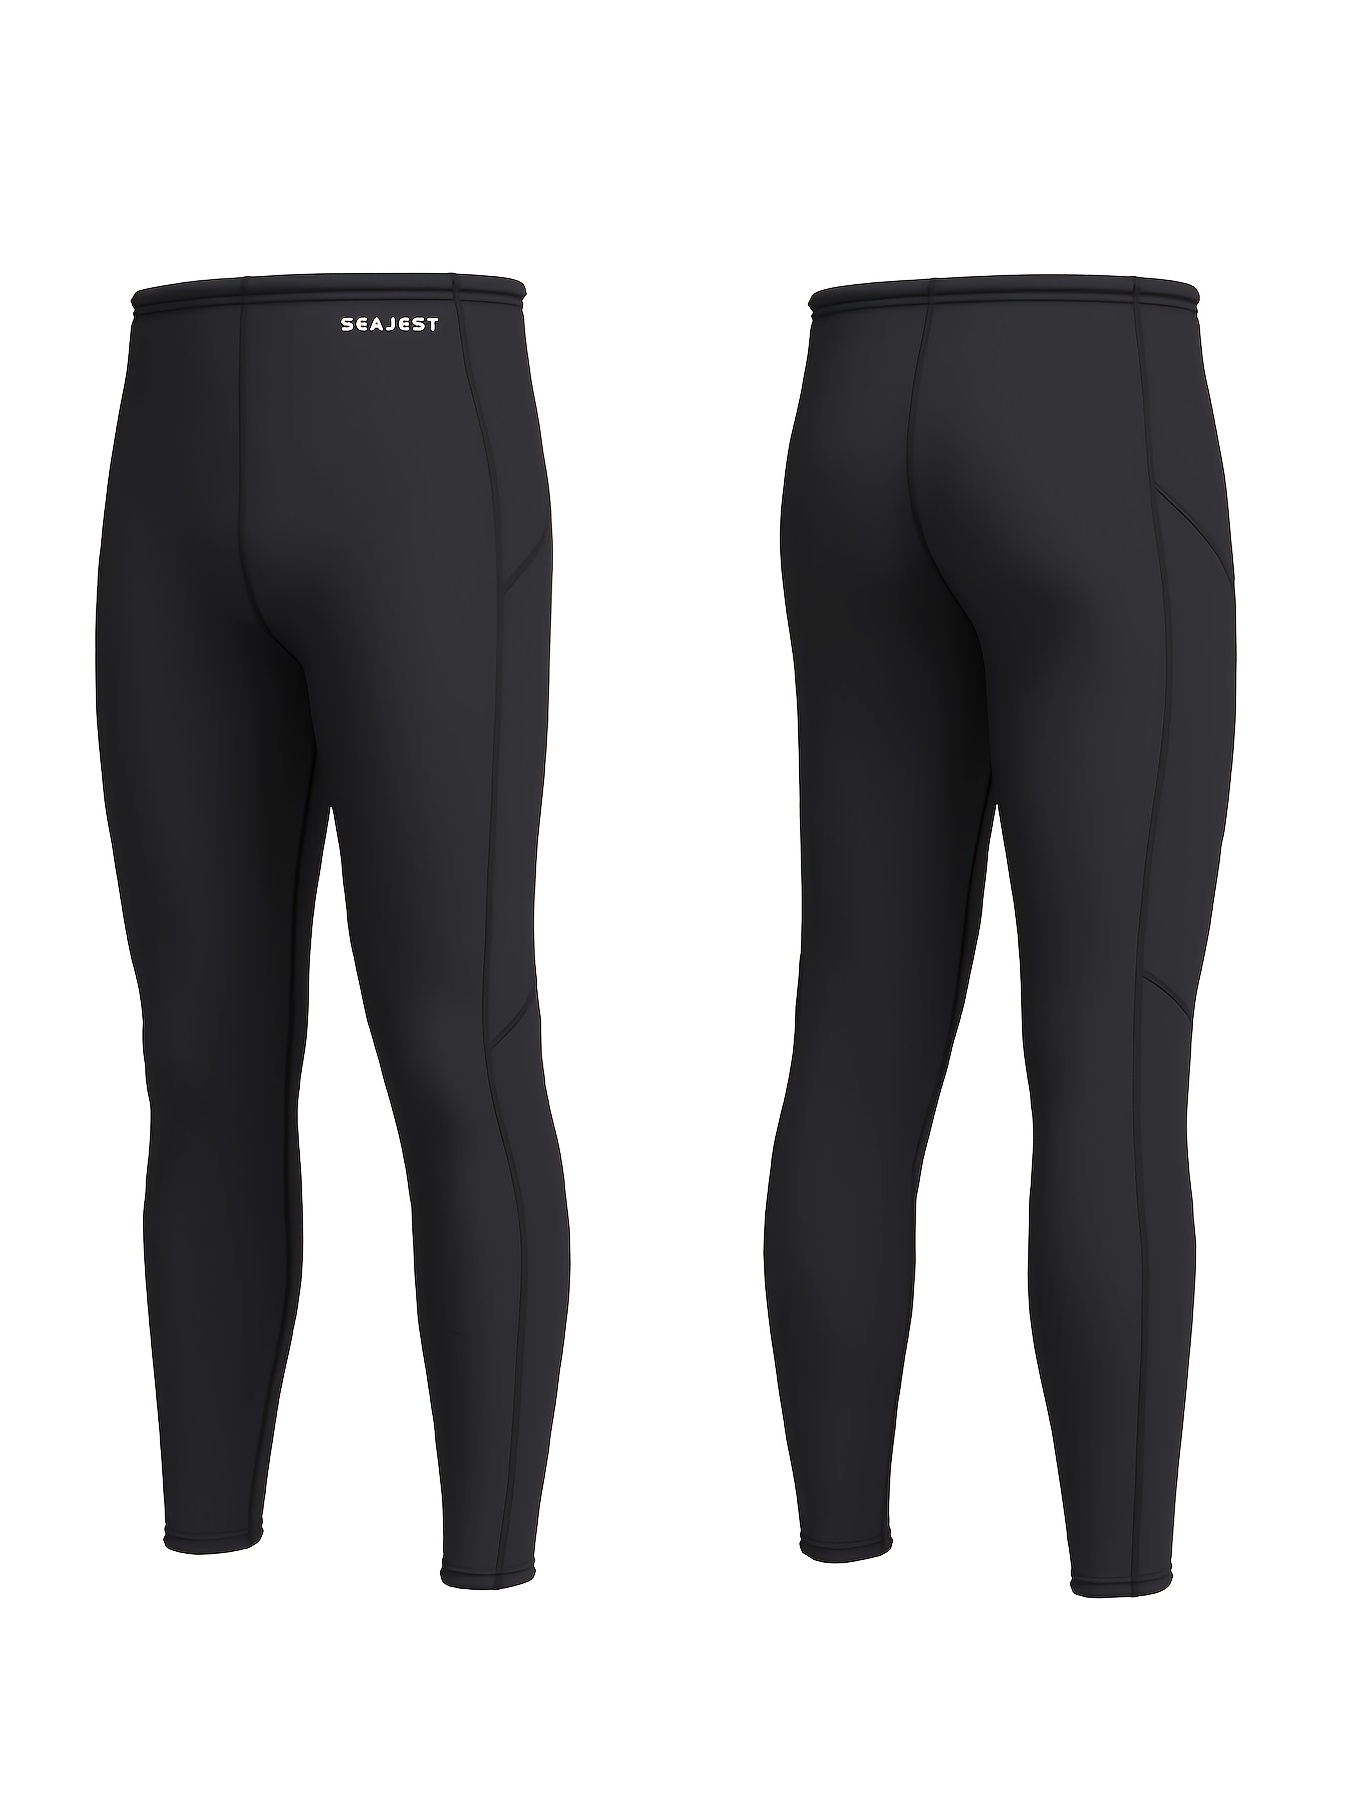  REALON Wetsuit Pants Women Swim Tights 3mm,2mm Neoprene For  Men In Cold Water Thermo Leggings Diving Snorkel Surfing Outdoor Sport UV  Wet Suits Pant